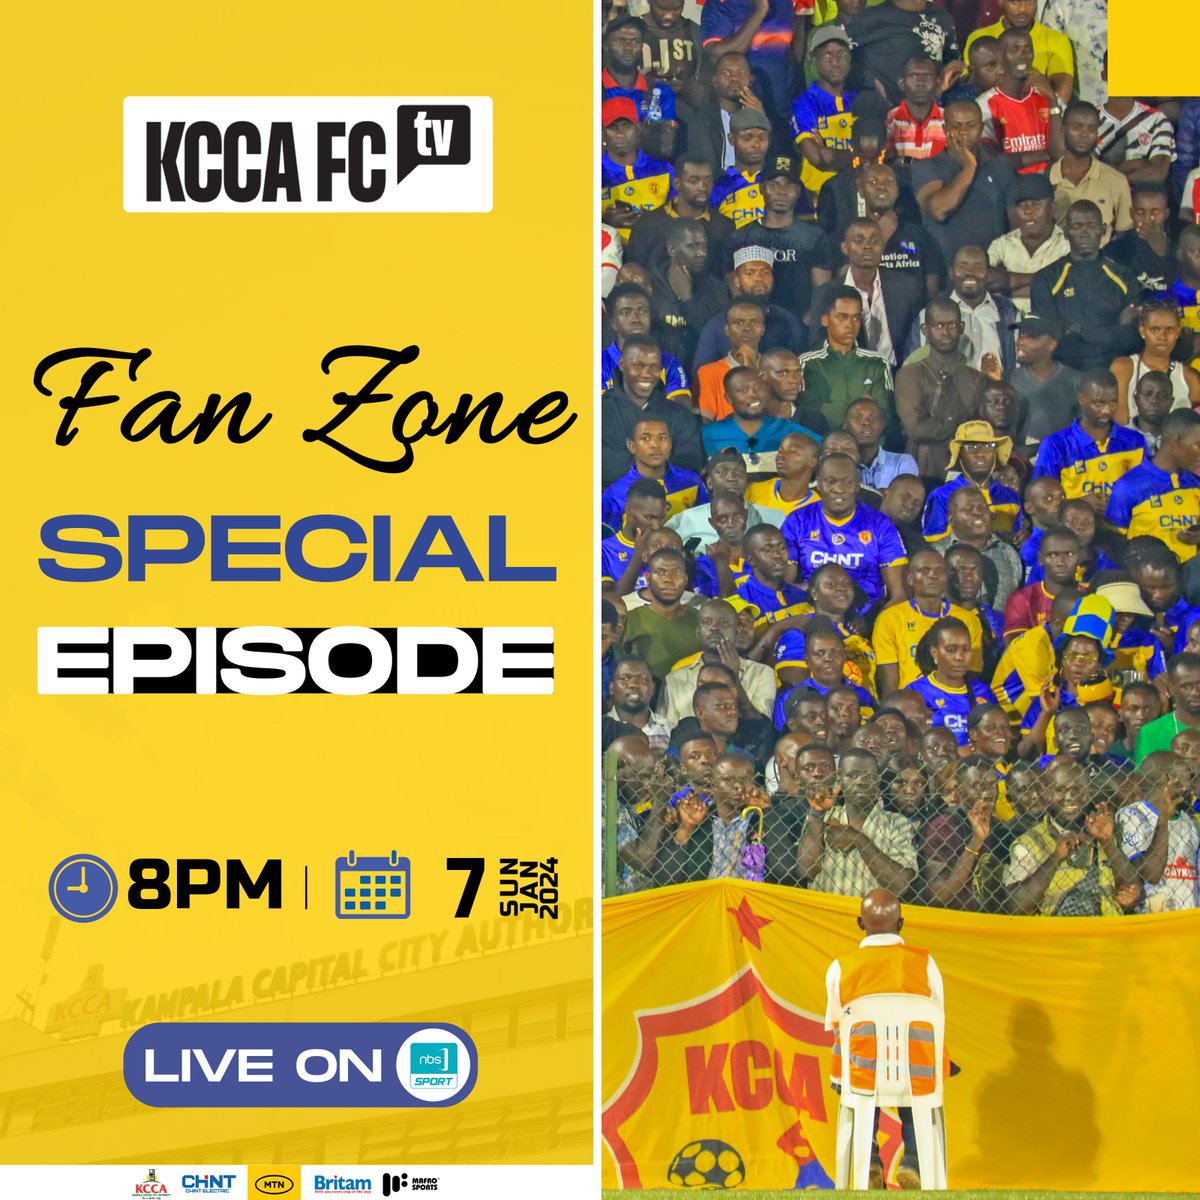 Tonight is a special edition for fans to share their thoughts on the first round. #KCCAFC #KCCAFC60 #KCCAFCTV